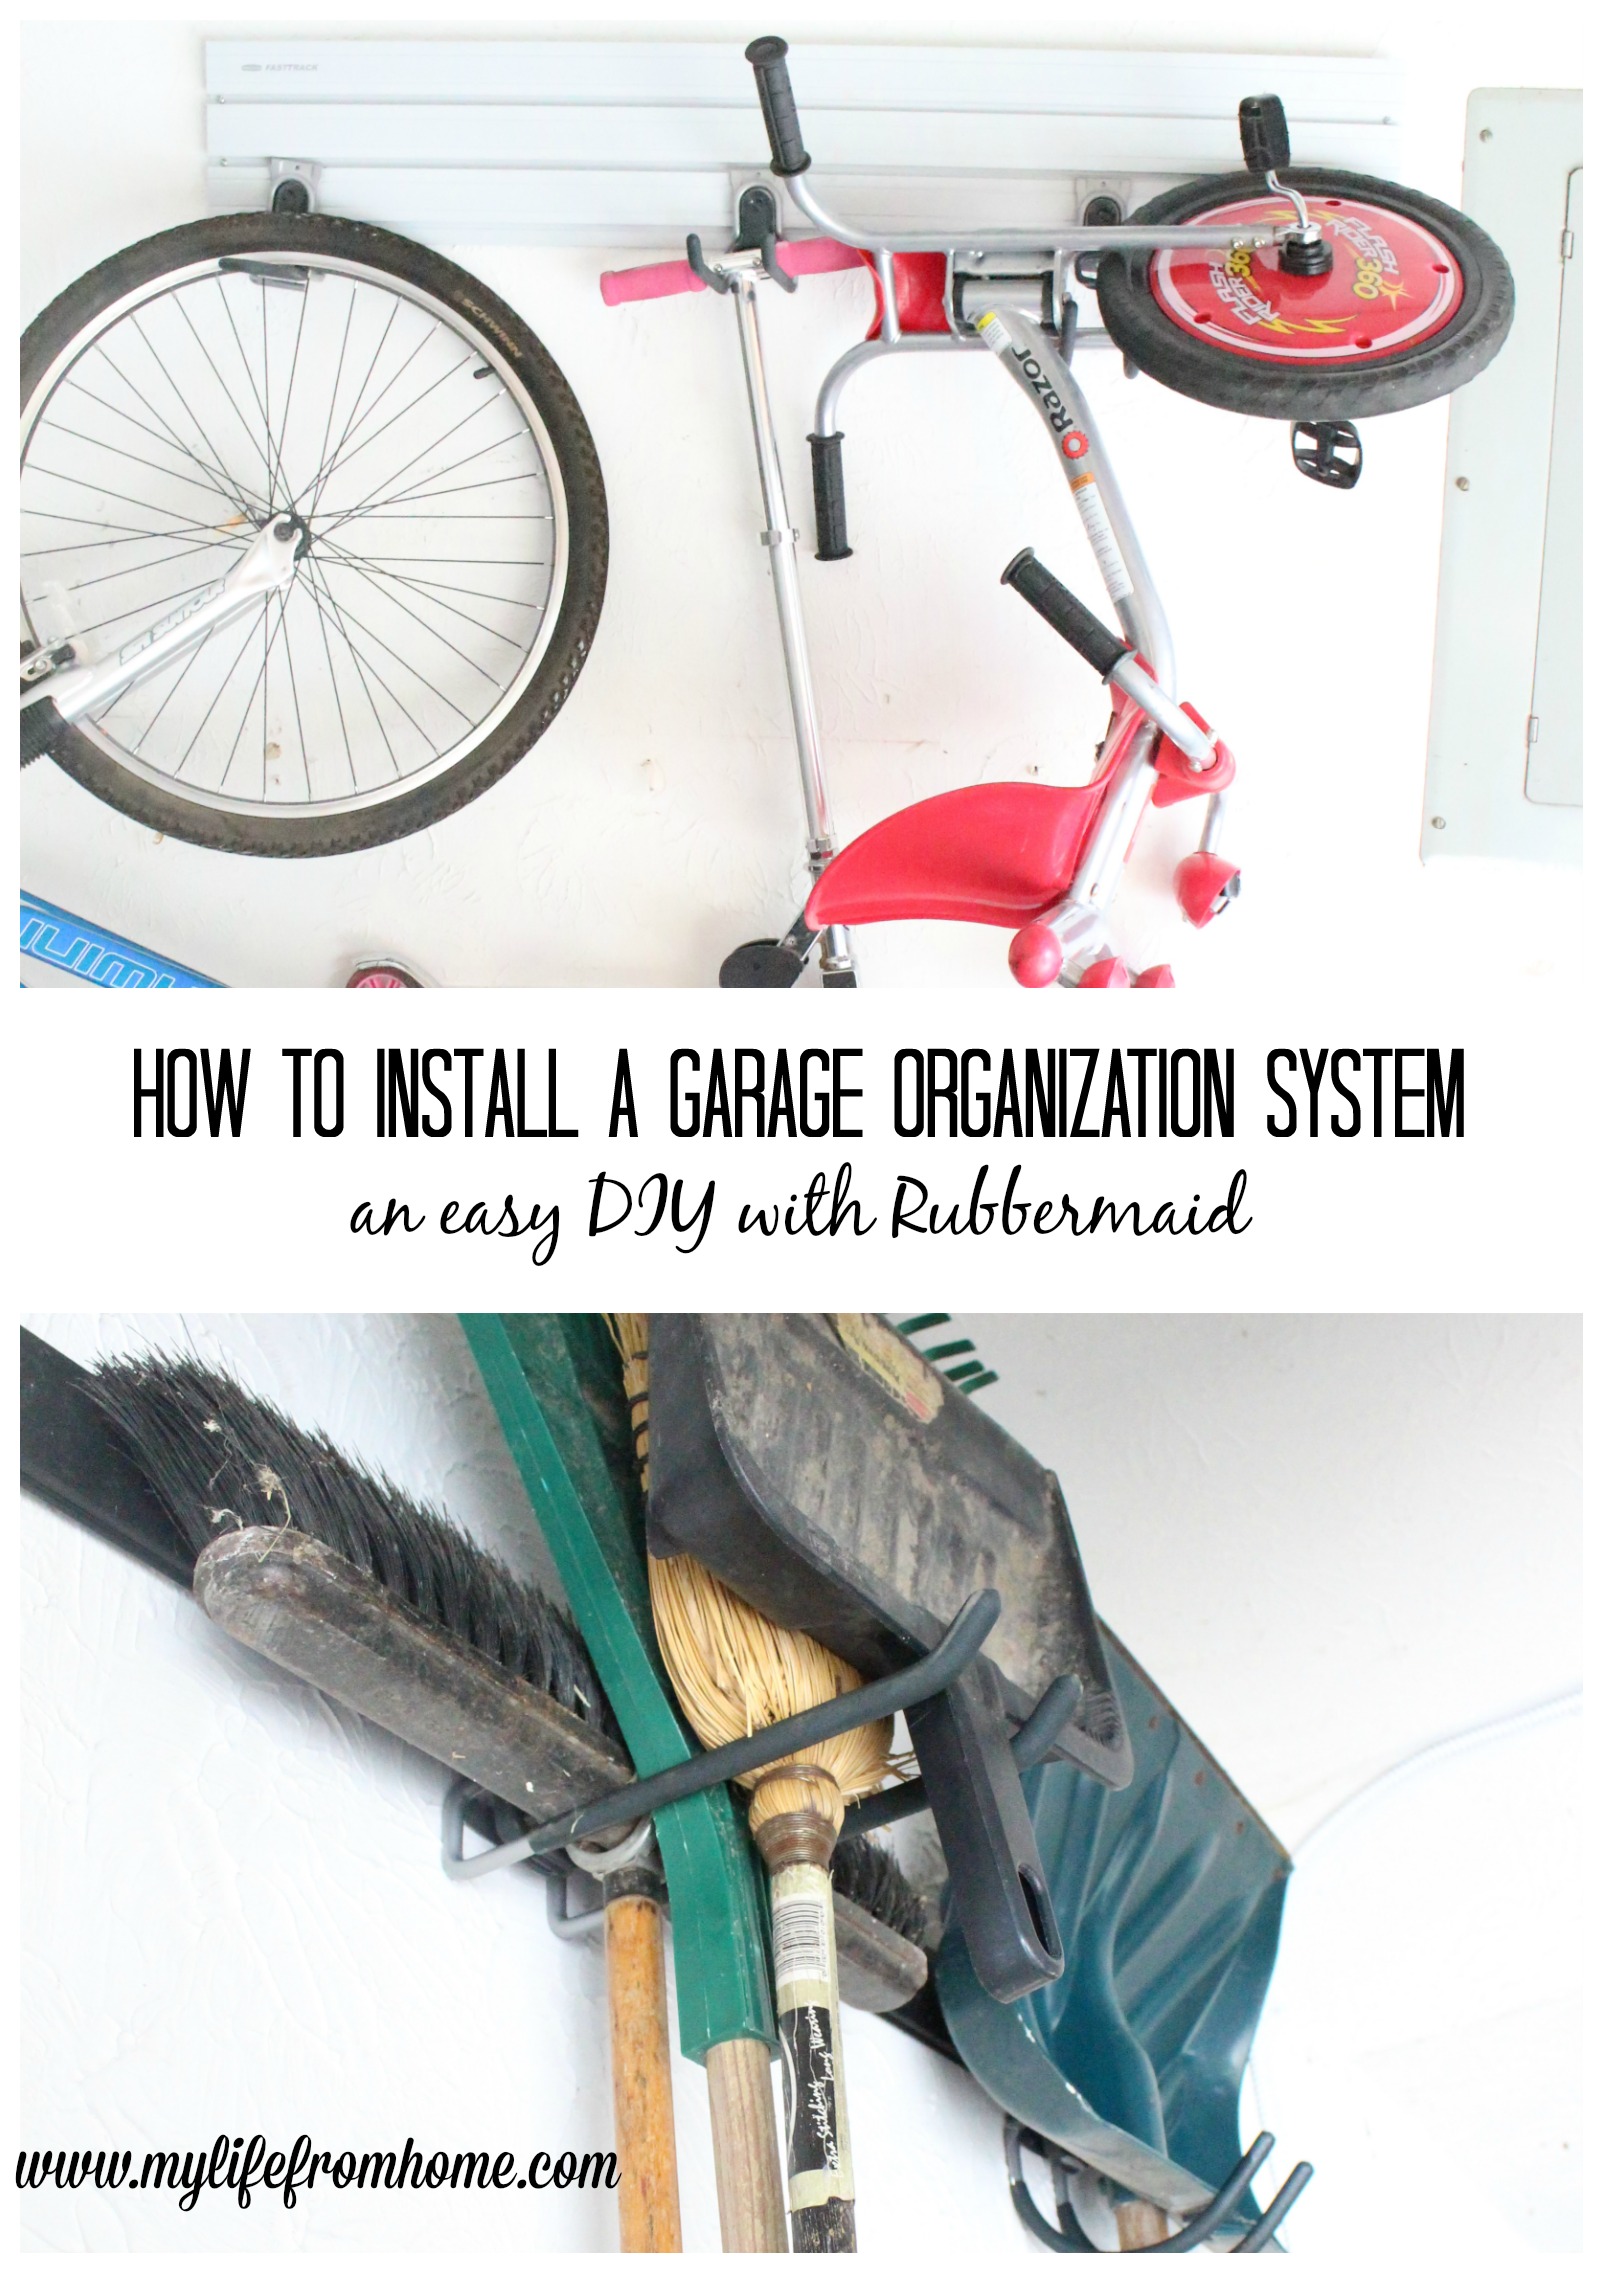 How to Install a Garage Organization System by Rubbermaid garage organization Rubbermaid garage system organizing your garage garage clean up